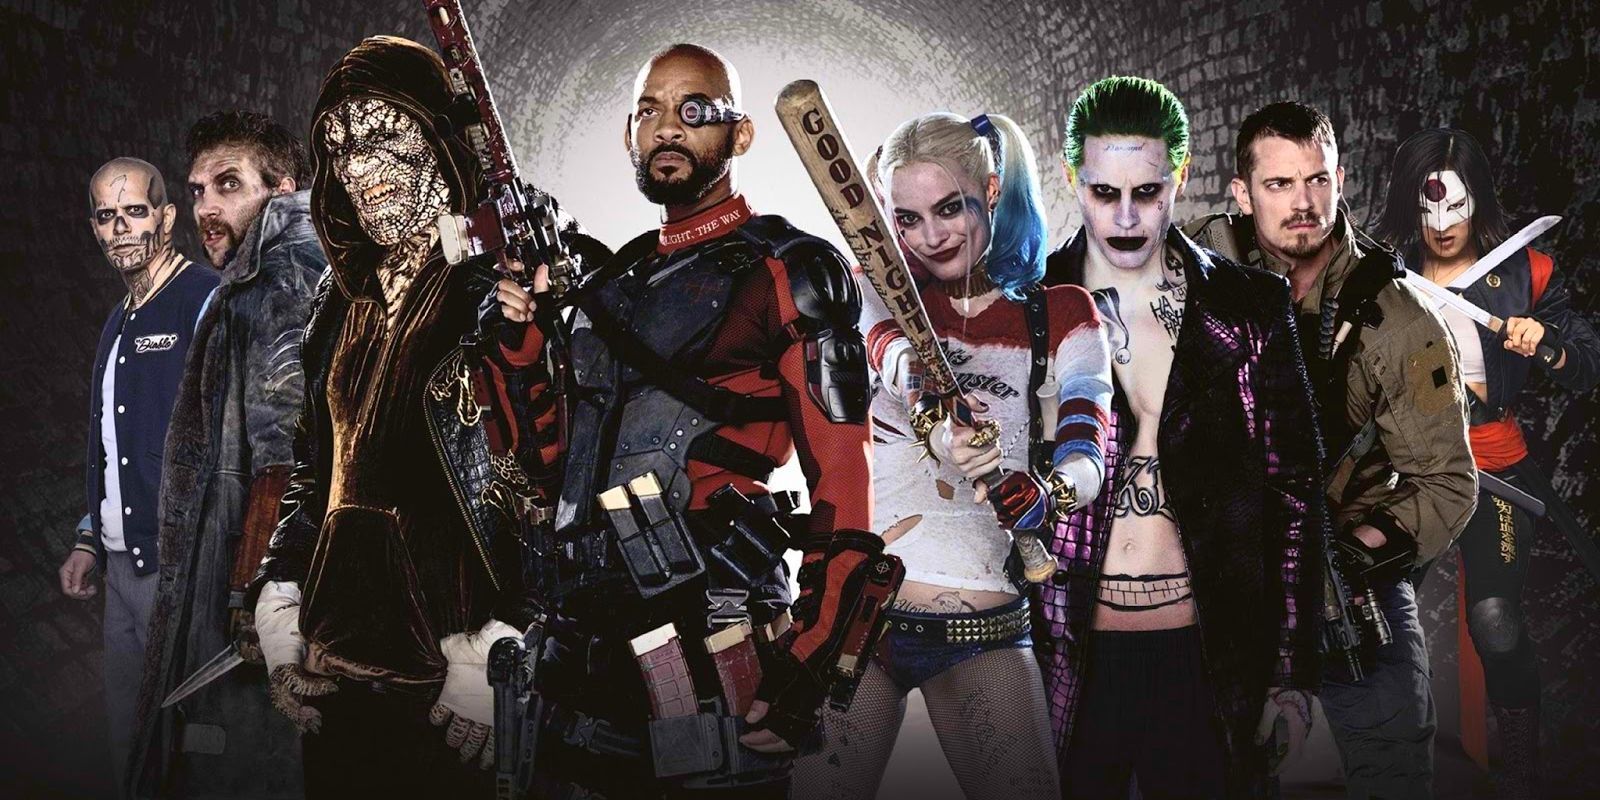 The cast of Suicide Squad in the 2016 film